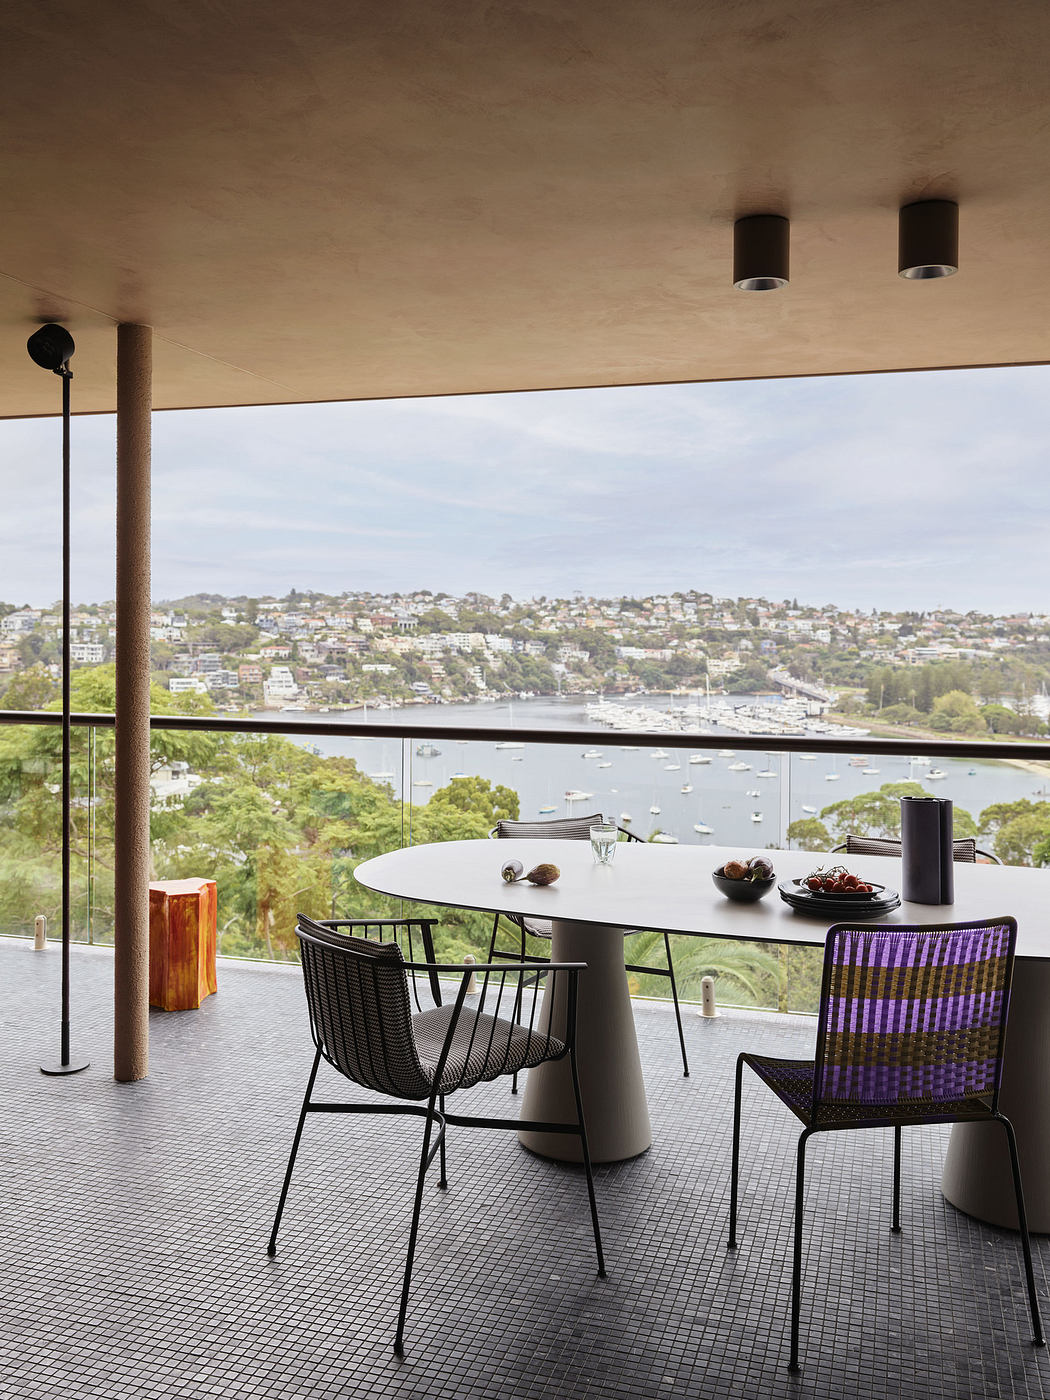 Modern balcony with stylish furniture and scenic river view.